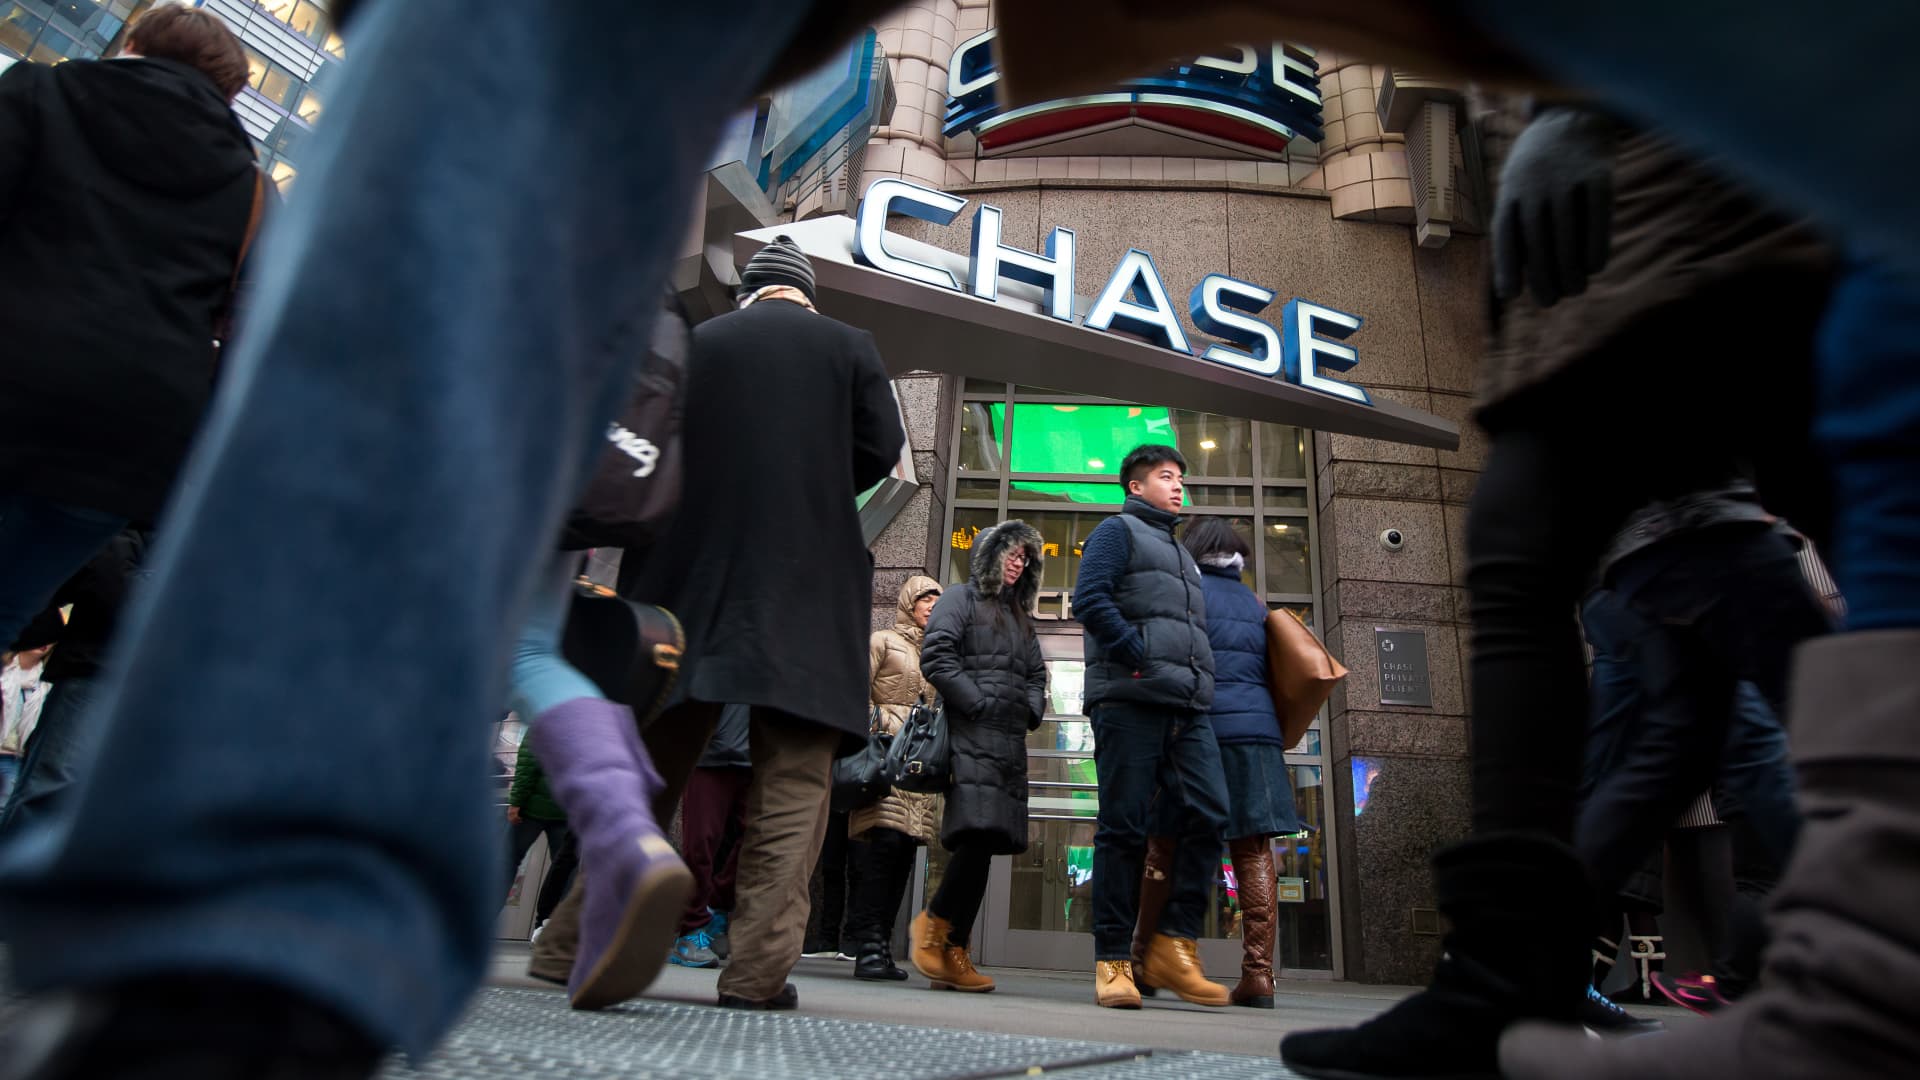 Big banks have drastically cut overdraft charges, but customers still paid $2.2 billion last year